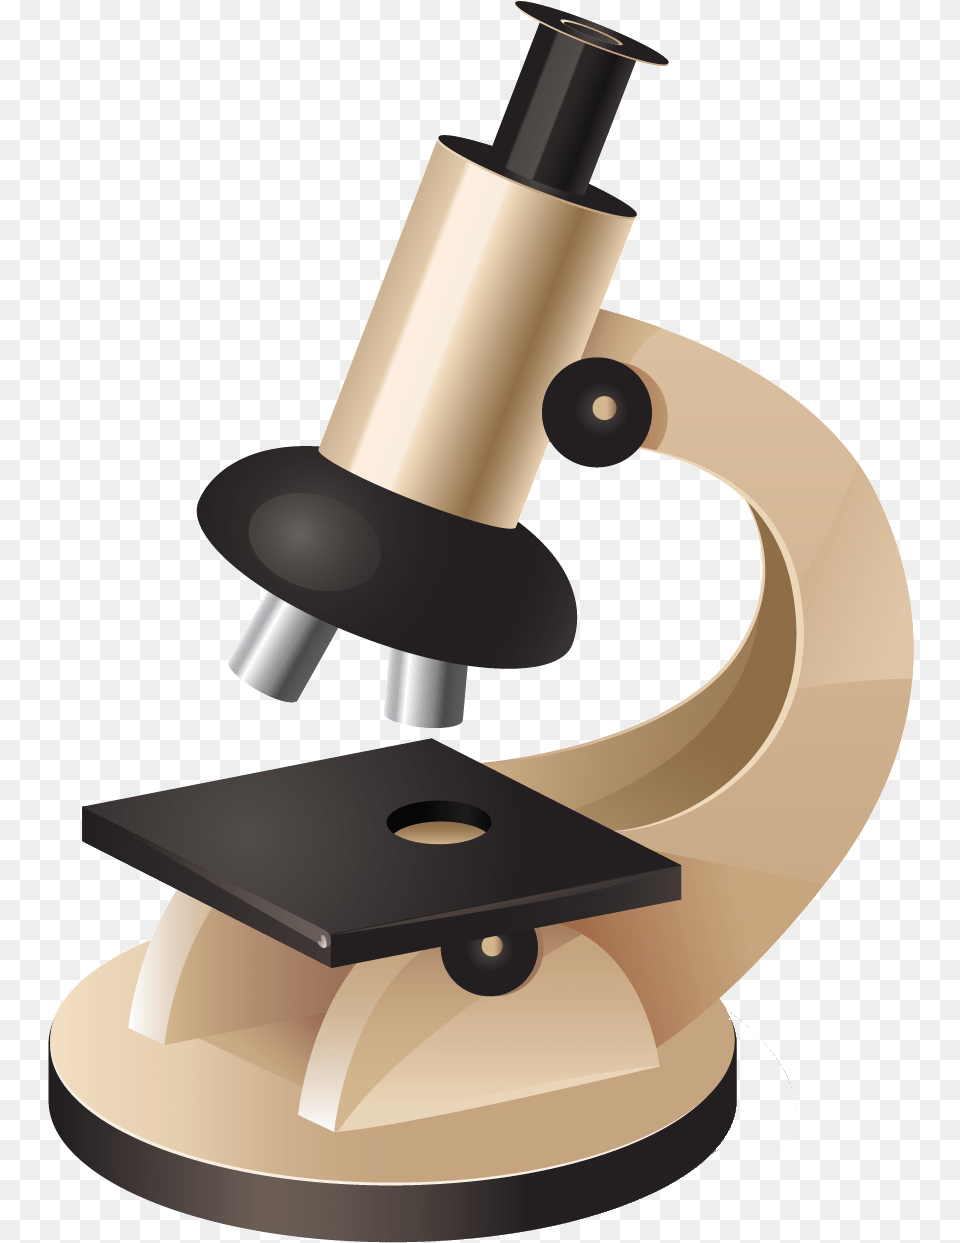 Microscope Clipart Background Microscope Clipart Free Transparent Png